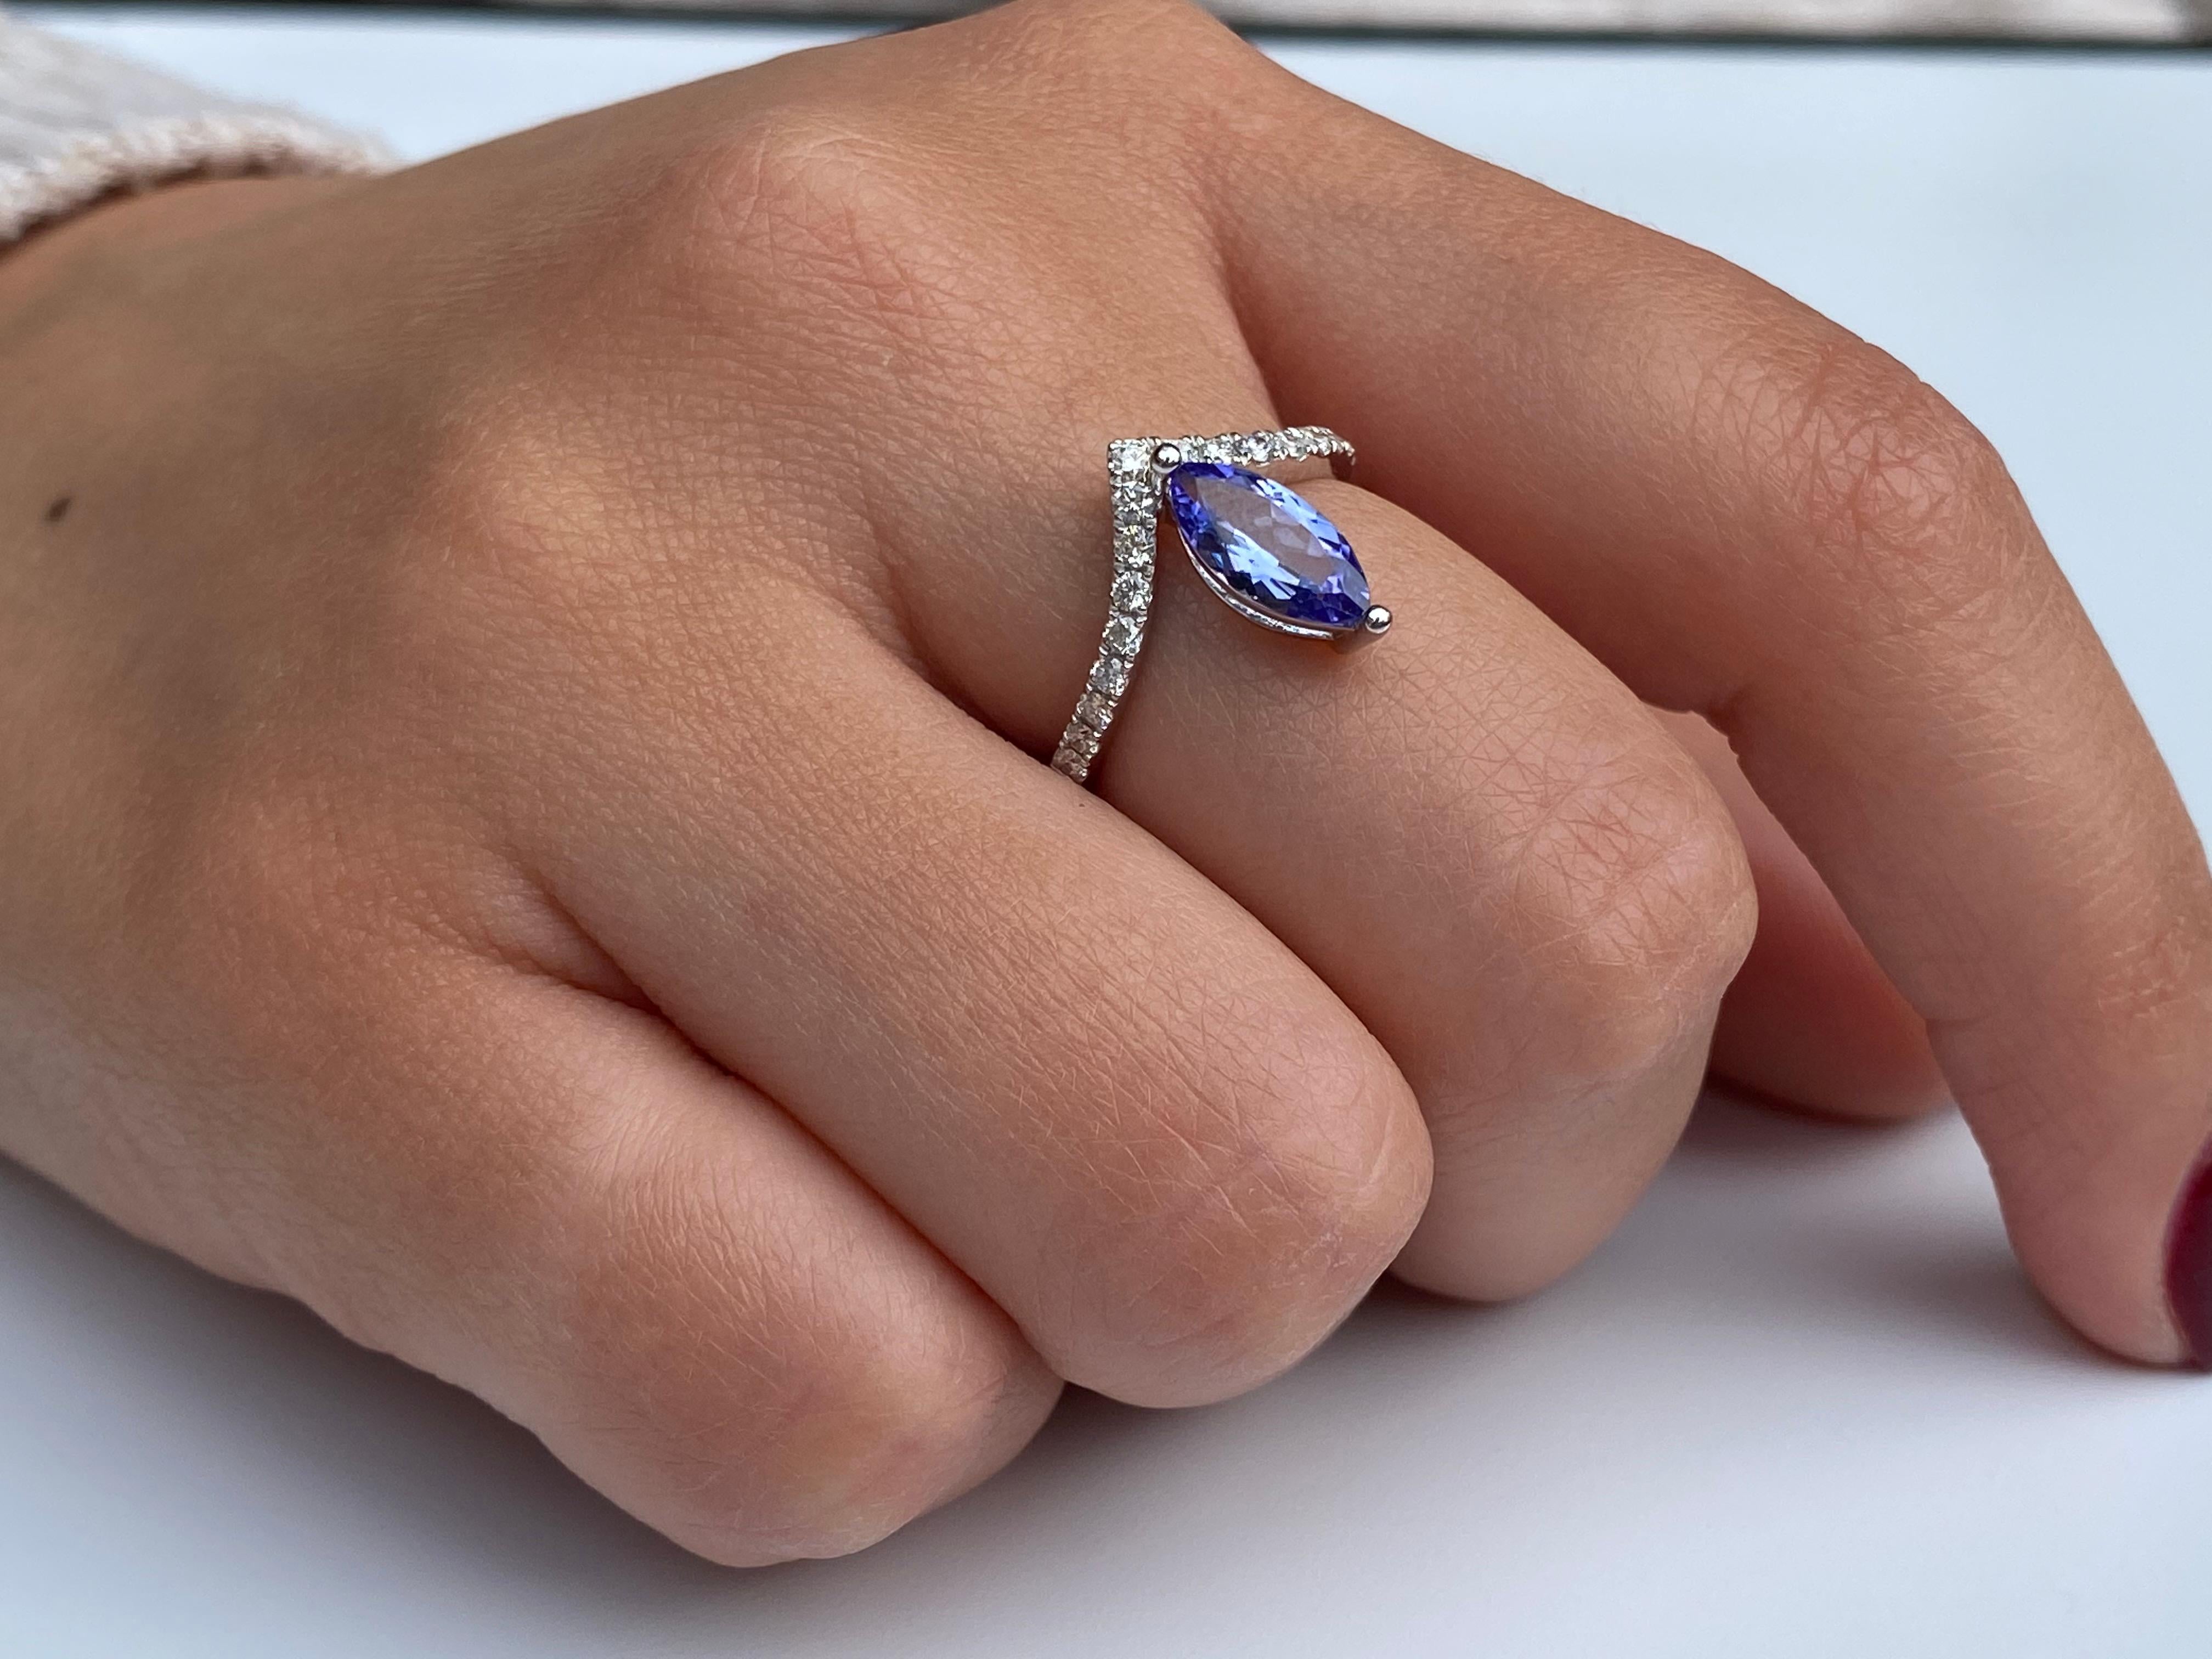 Centering a 0.92 Carat Marquis-Cut Violet Tanzanite, accented by 0.31 carats of Round-Brilliant Cut Diamonds, and set in 18K White Gold. 


Details:
✔ Stone: Tanzanite 
✔ Setting: 18k white gold
✔ Tanzanite Carat: 0.92 carats
✔ Tanzanite Origin: